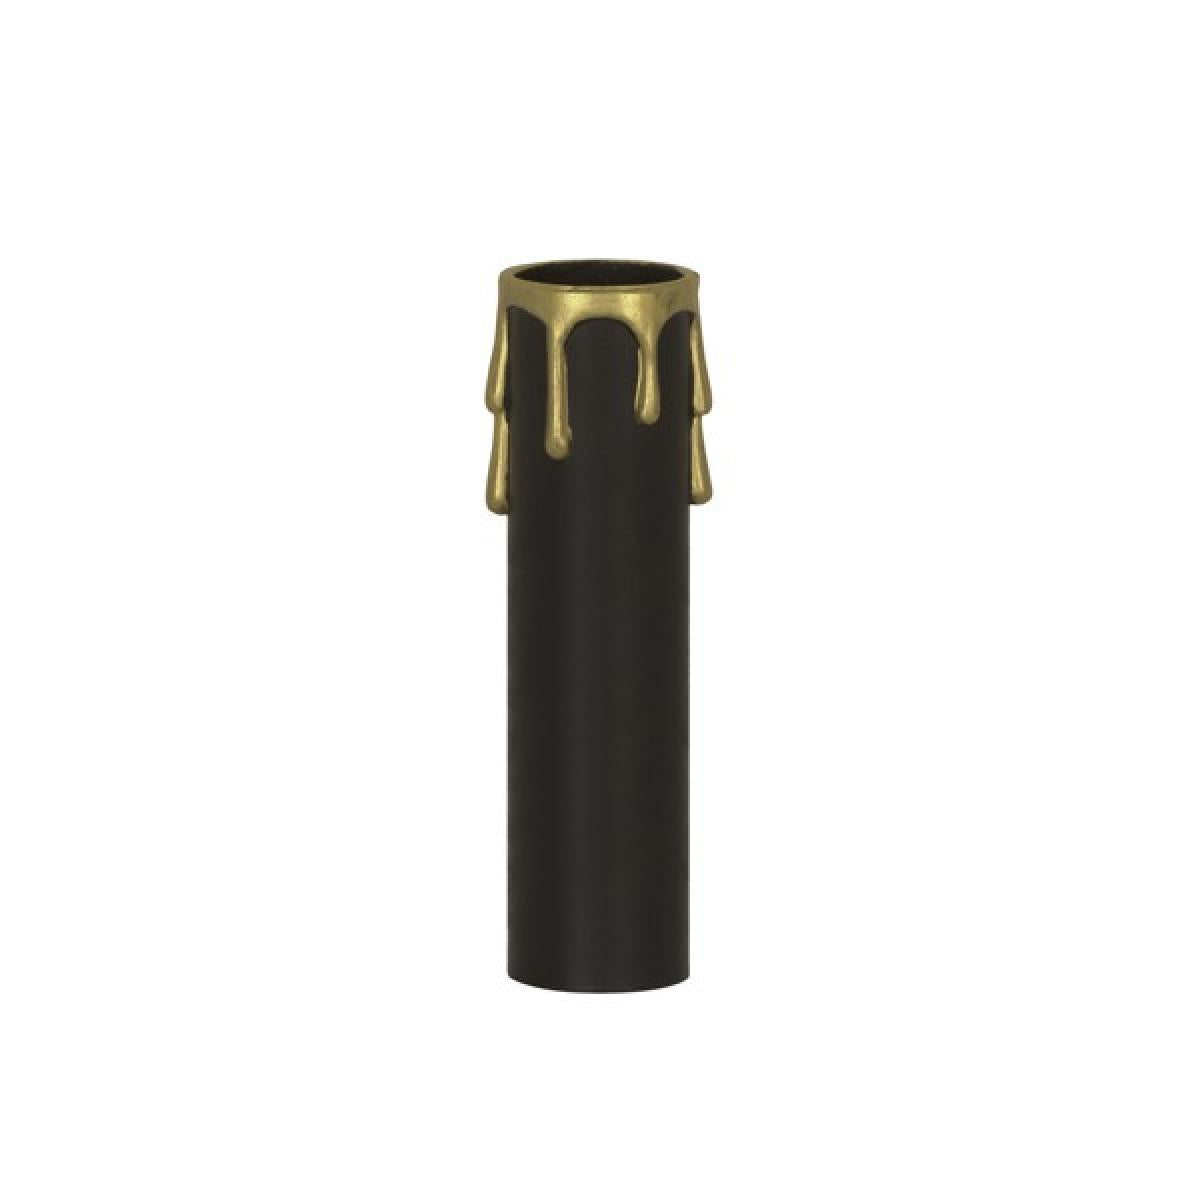 Satco 90-368 Plastic Drip Candle Cover Black Plastic With Gold Drip 1-3/16" Inside Diameter 1-1/4" Outside Diameter 3" Height